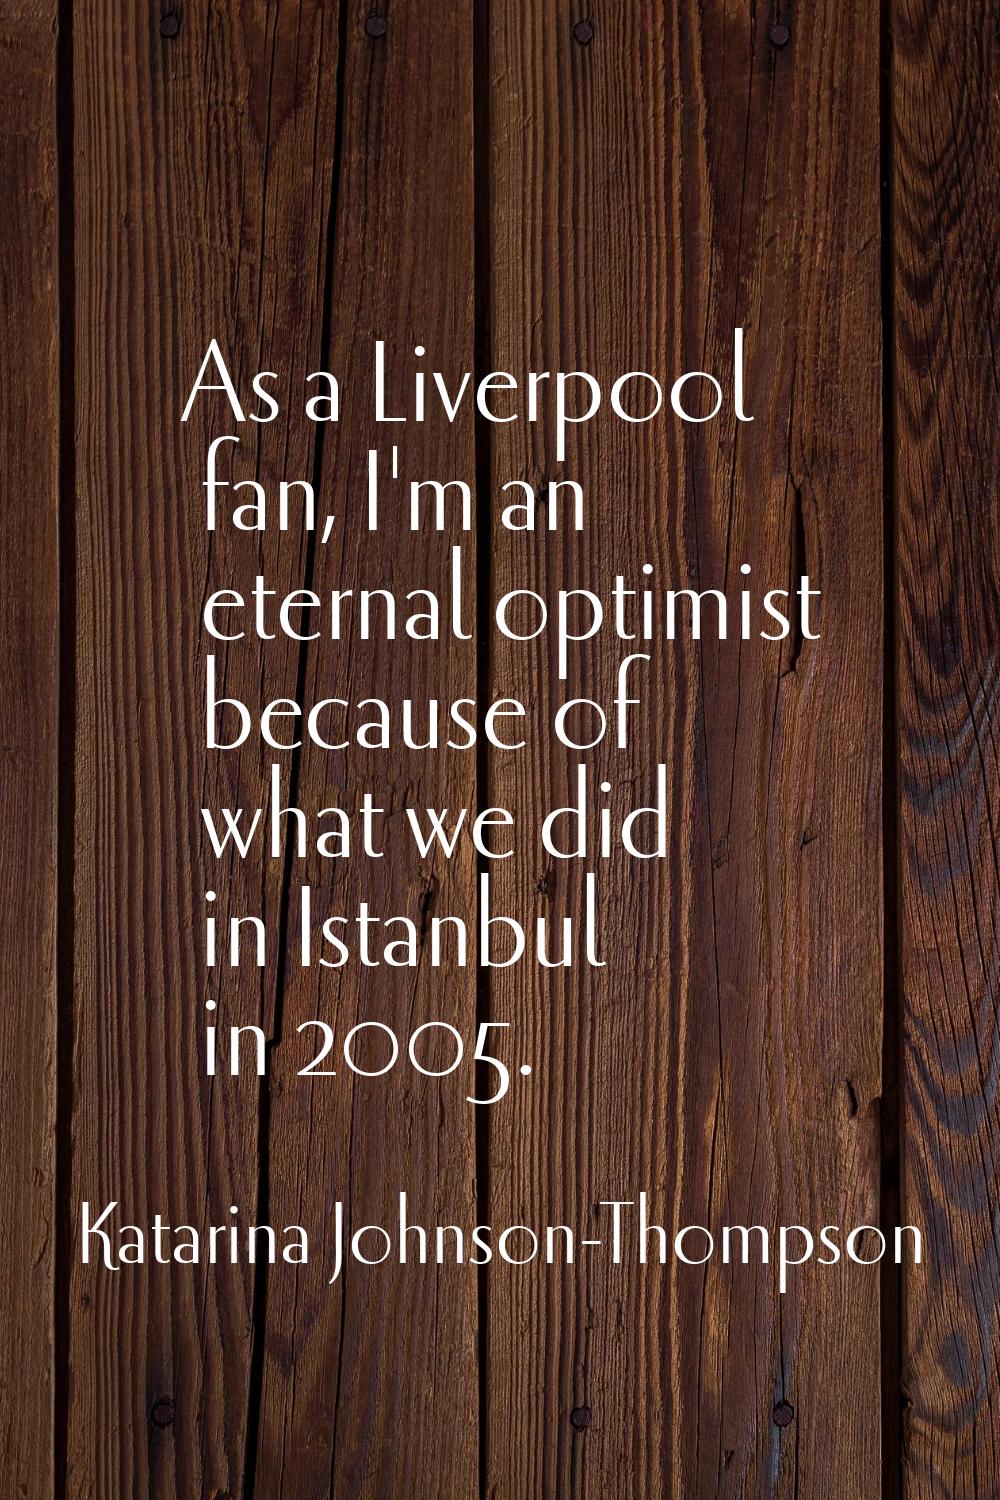 As a Liverpool fan, I'm an eternal optimist because of what we did in Istanbul in 2005.